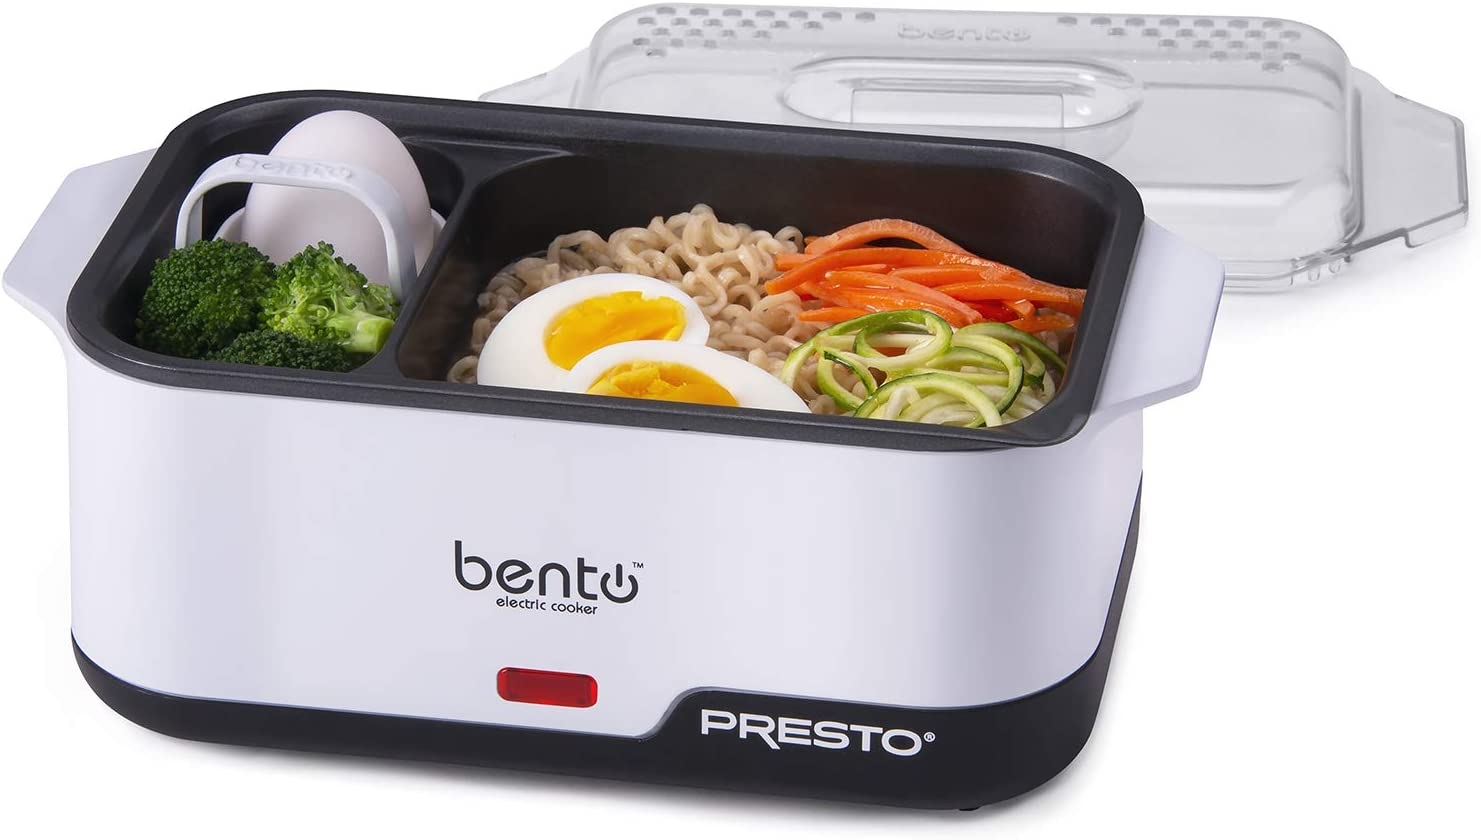 Presto Bento Electric Cooker Import To Shop ×Product customization General Description Gallery Reviews Variations Specification